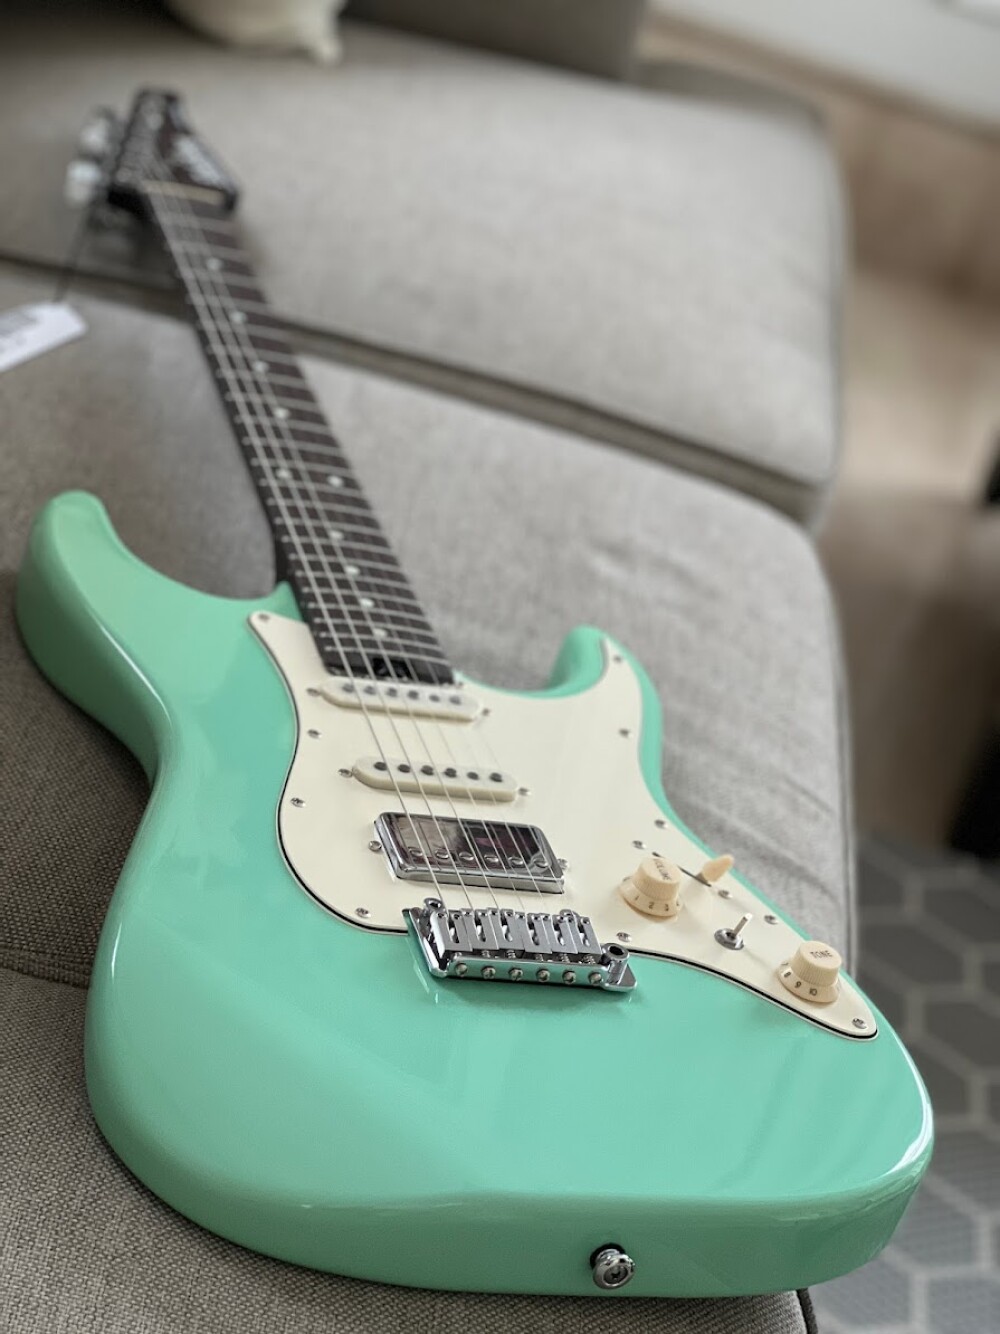 Soloking MS-11 Classic with One Piece Rosewood Neck in Surf Green ...